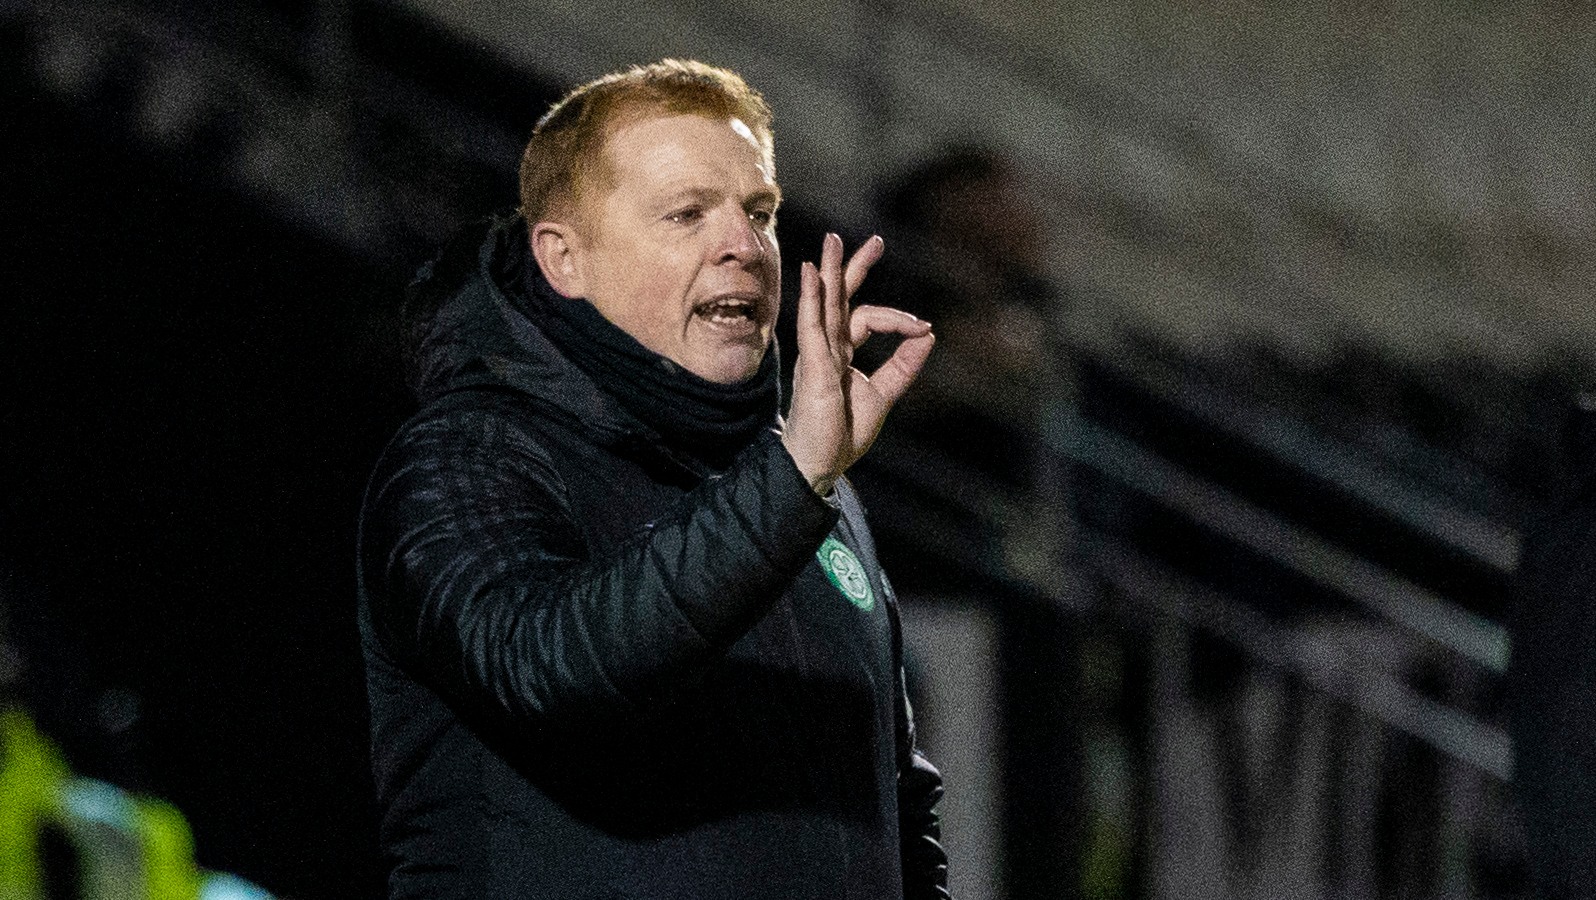 Celtic have been without a manager since Neil Lennon left in February.